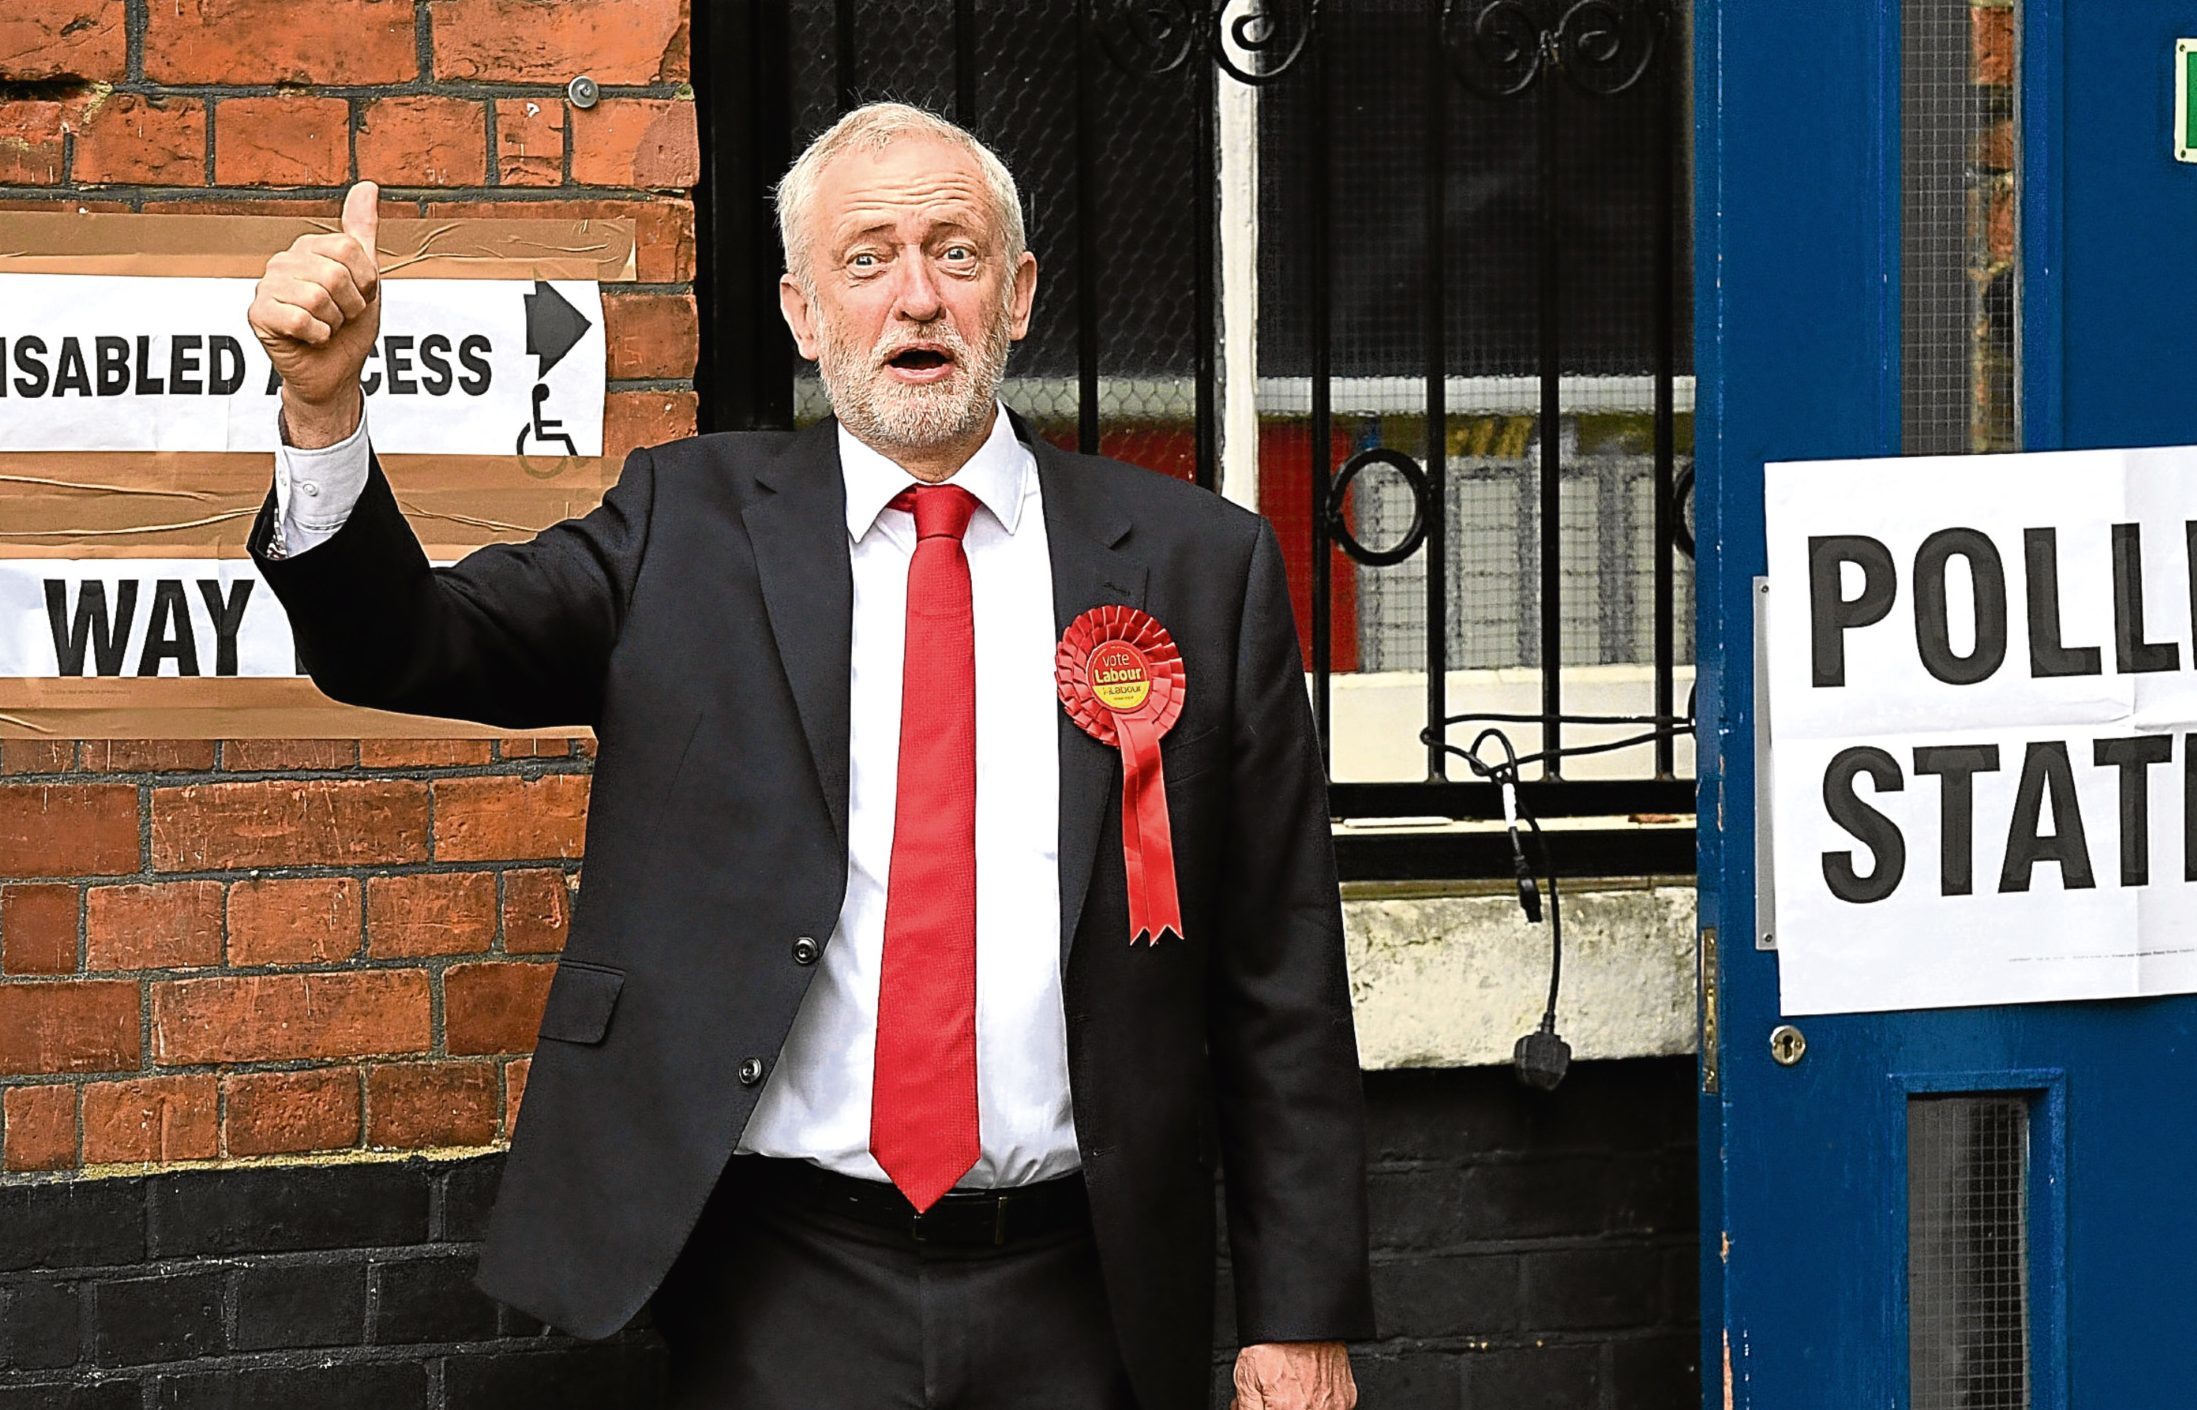 Labour party leader Jeremy Corbyn casts his vote at a polling station (Leon Neal/Getty Images)